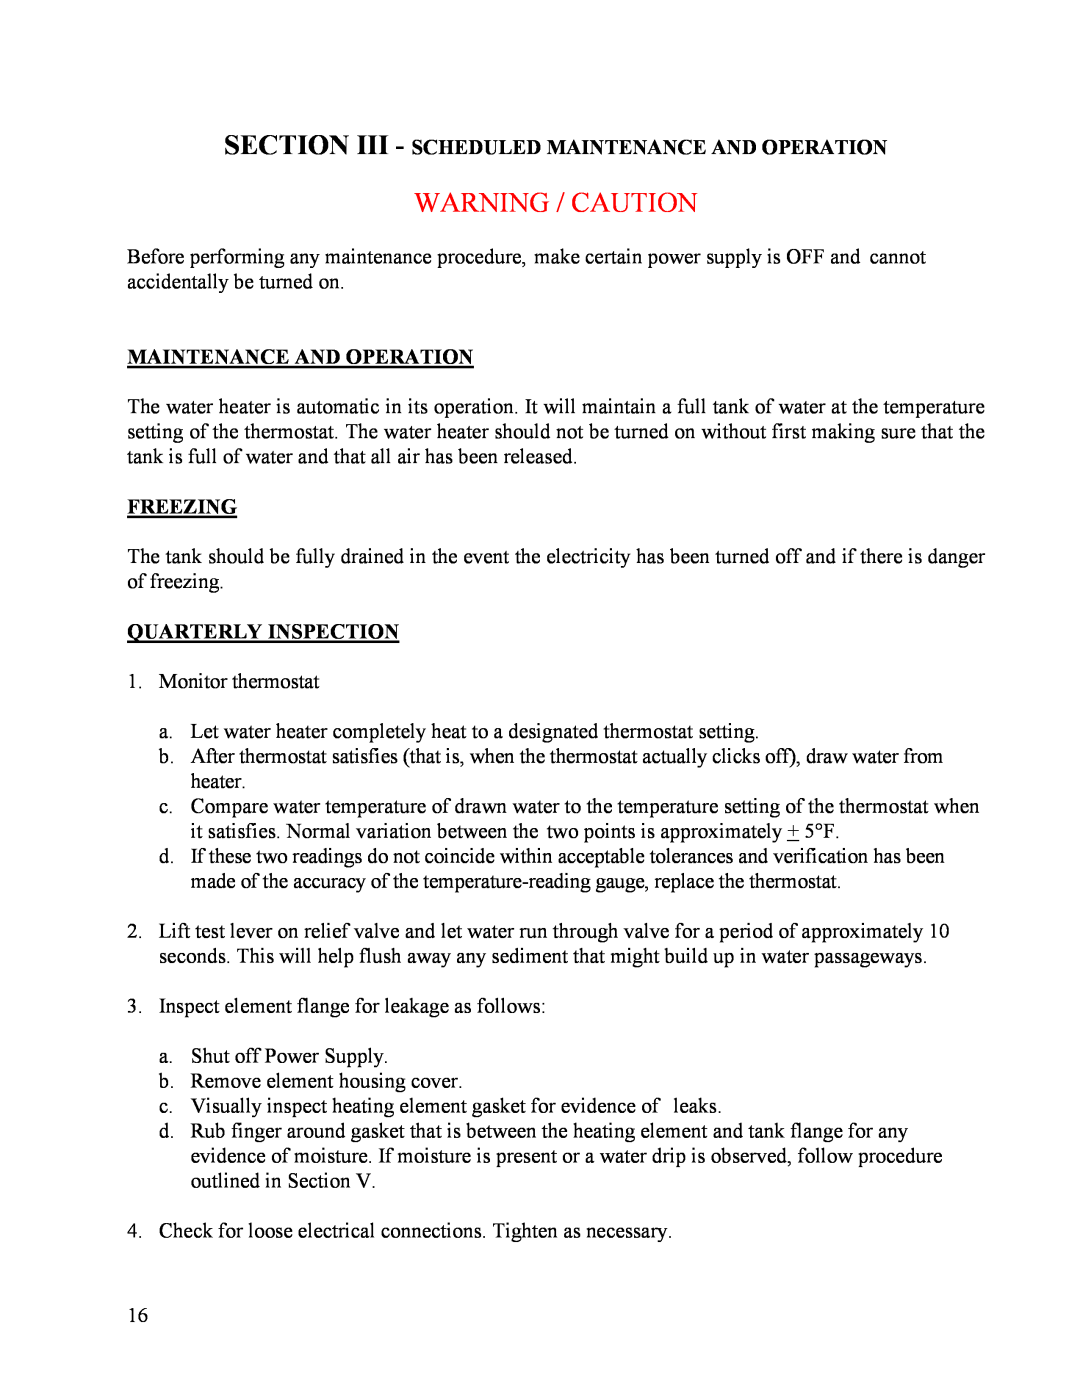 Hubbell Electric Heater Company manual Section Iii - Scheduled Maintenance And Operation, Freezing, Quarterly Inspection 